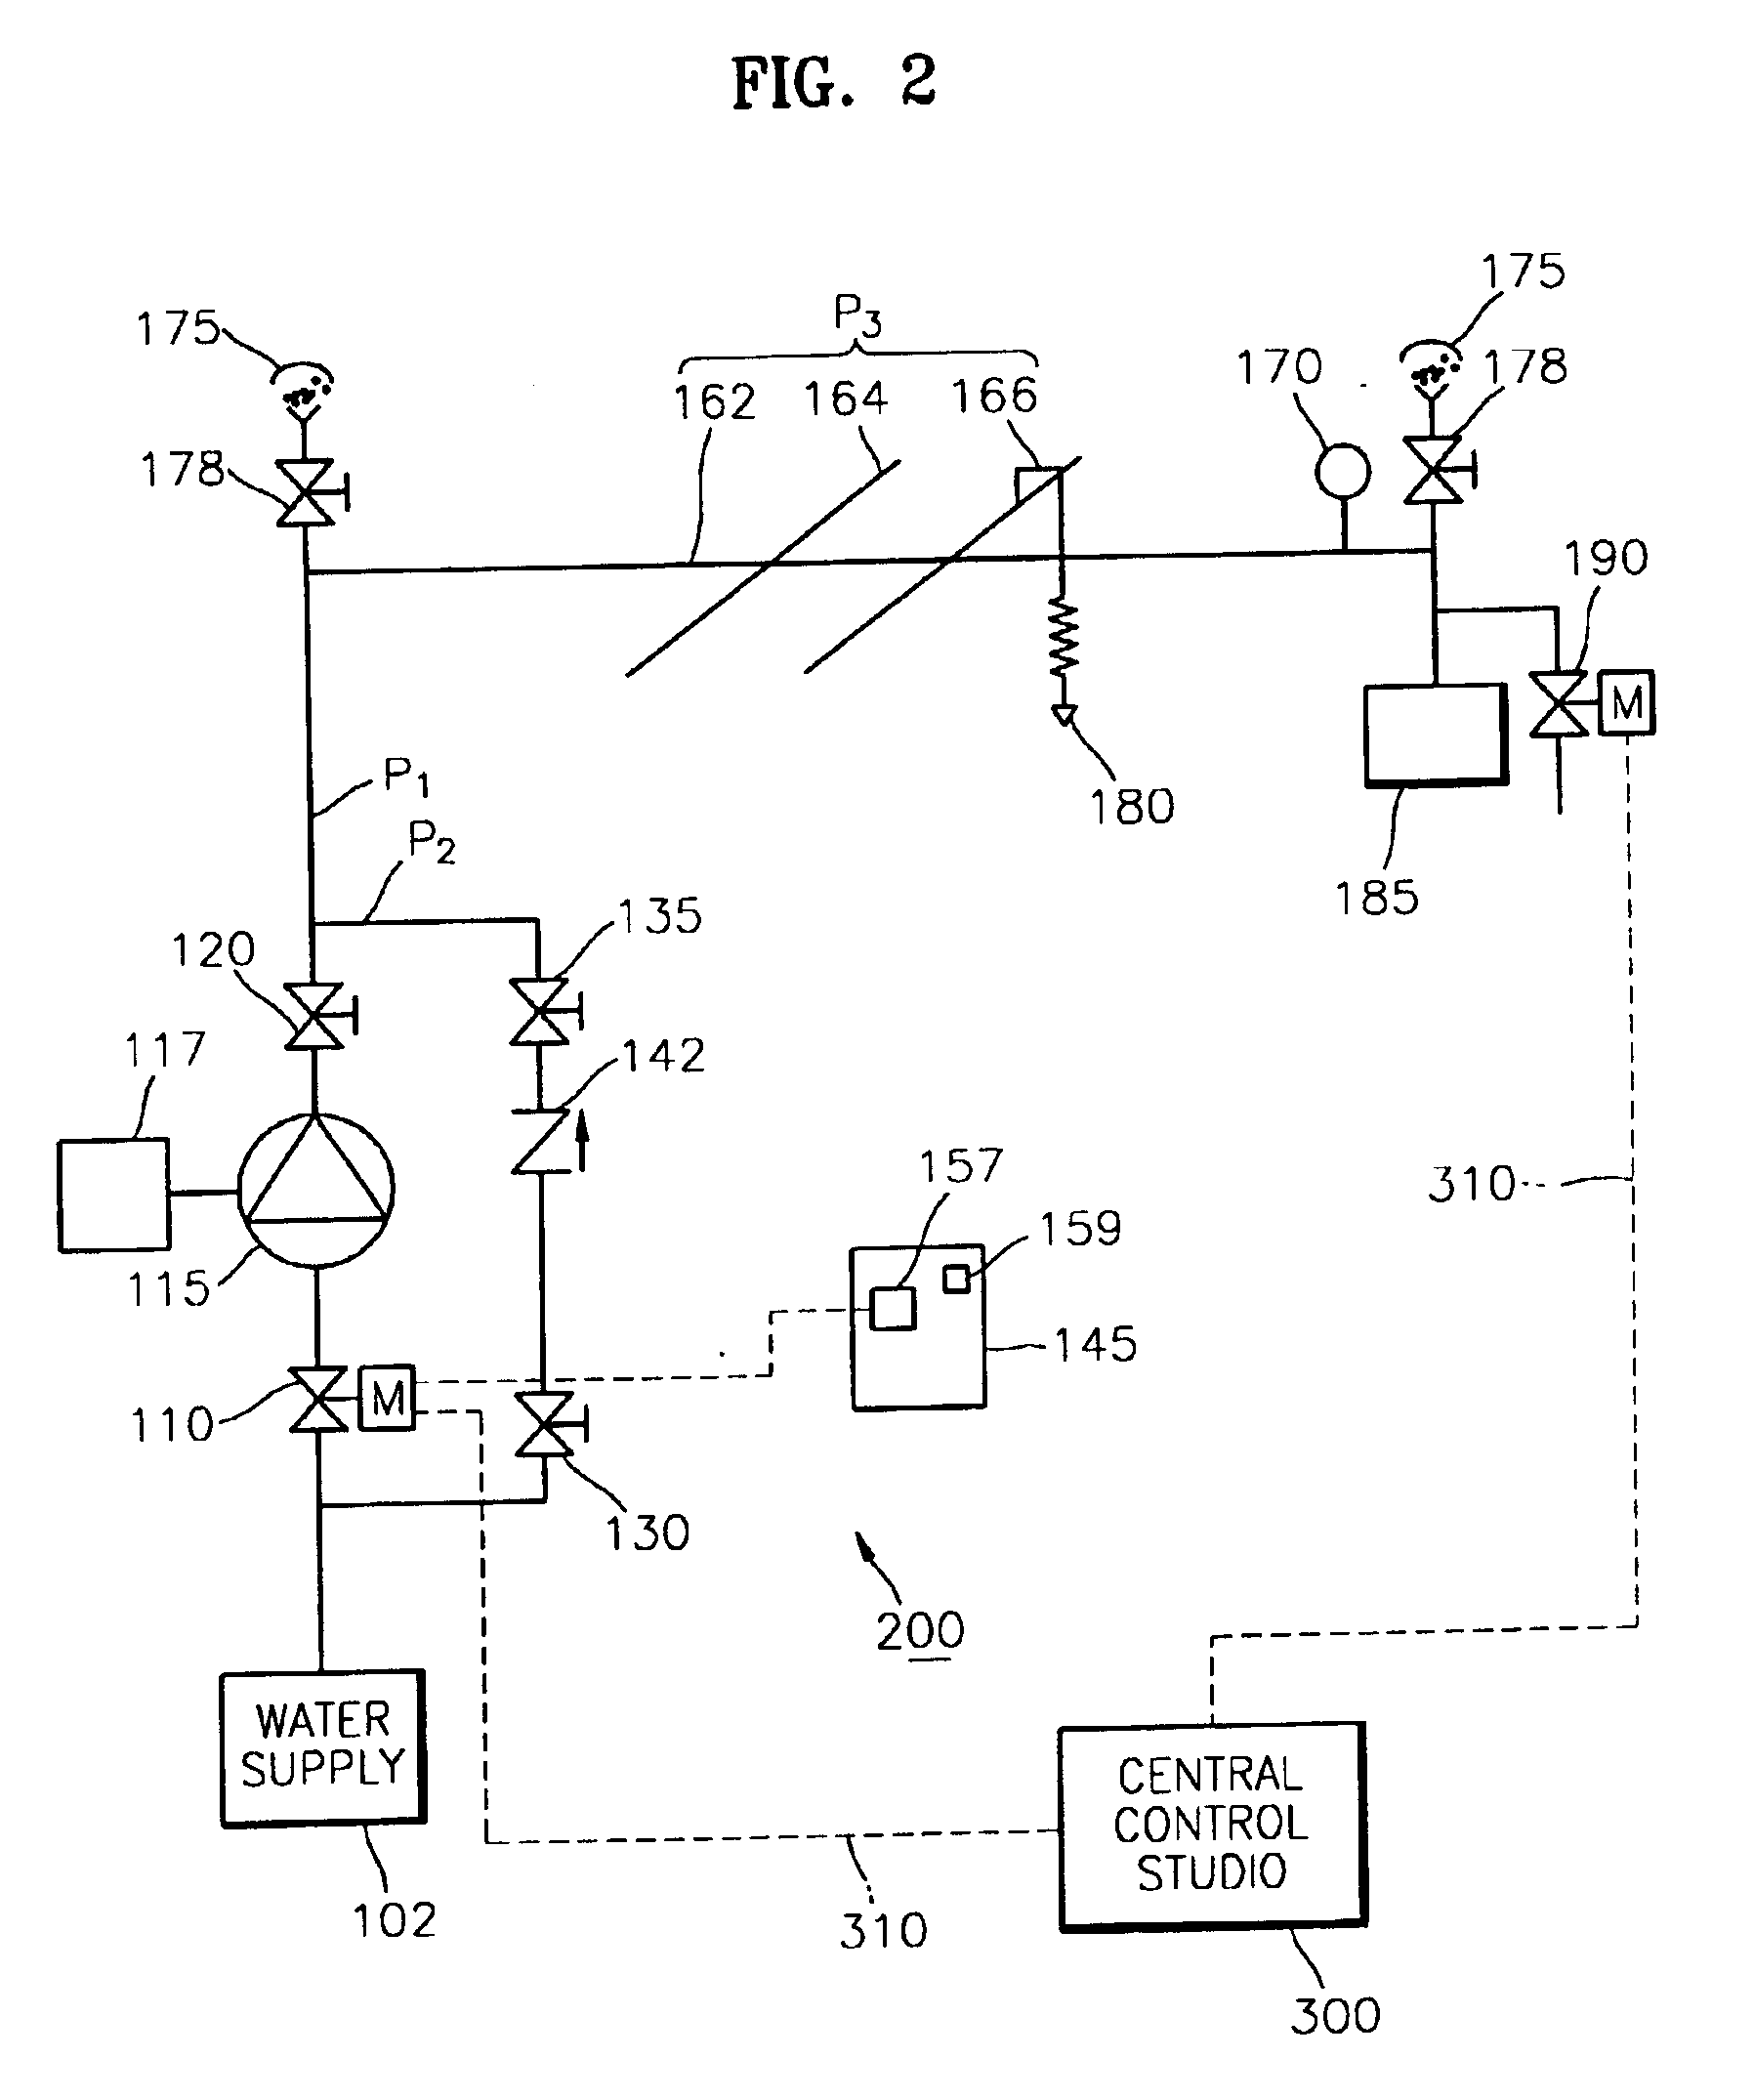 Wet-pipe sprinkler system, method of supplying water and dealing with water leak in the sprinkler system